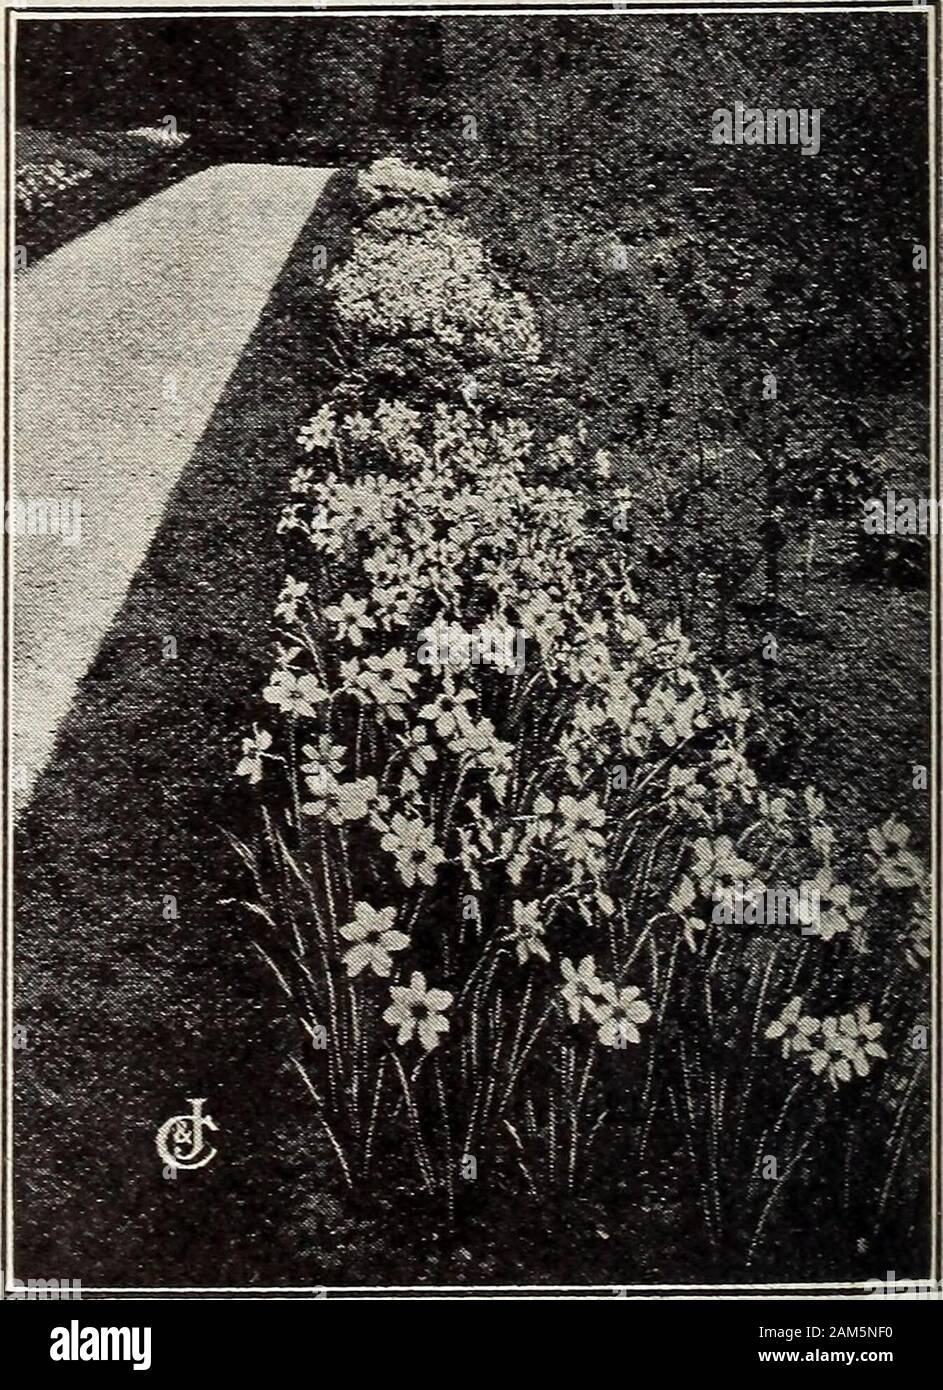 New floral guide : autumn 1913 . bewell started by setting the bulbs when plantedin a dark place for two or three weeks beforebringing gradually to the light. By planting at intervals you can have asuccession of bloom all winter. First-size, quick-blooming bulbs, 12 cts.each, 3 for 35 cts., 12 for $1.25, 100 for $9,delivered free in U. S. A. DOUBLE ROMAN NARCISSUS The flowers are perfectly double andpure snow-white, with small center petals ofrich golden yellow. It blooms very quicklyeither in water or soil; delightfully fragrant.3c. each, 12 for 30c, 100 for $2, delivered. PETITE DAFFODILS (B Stock Photo